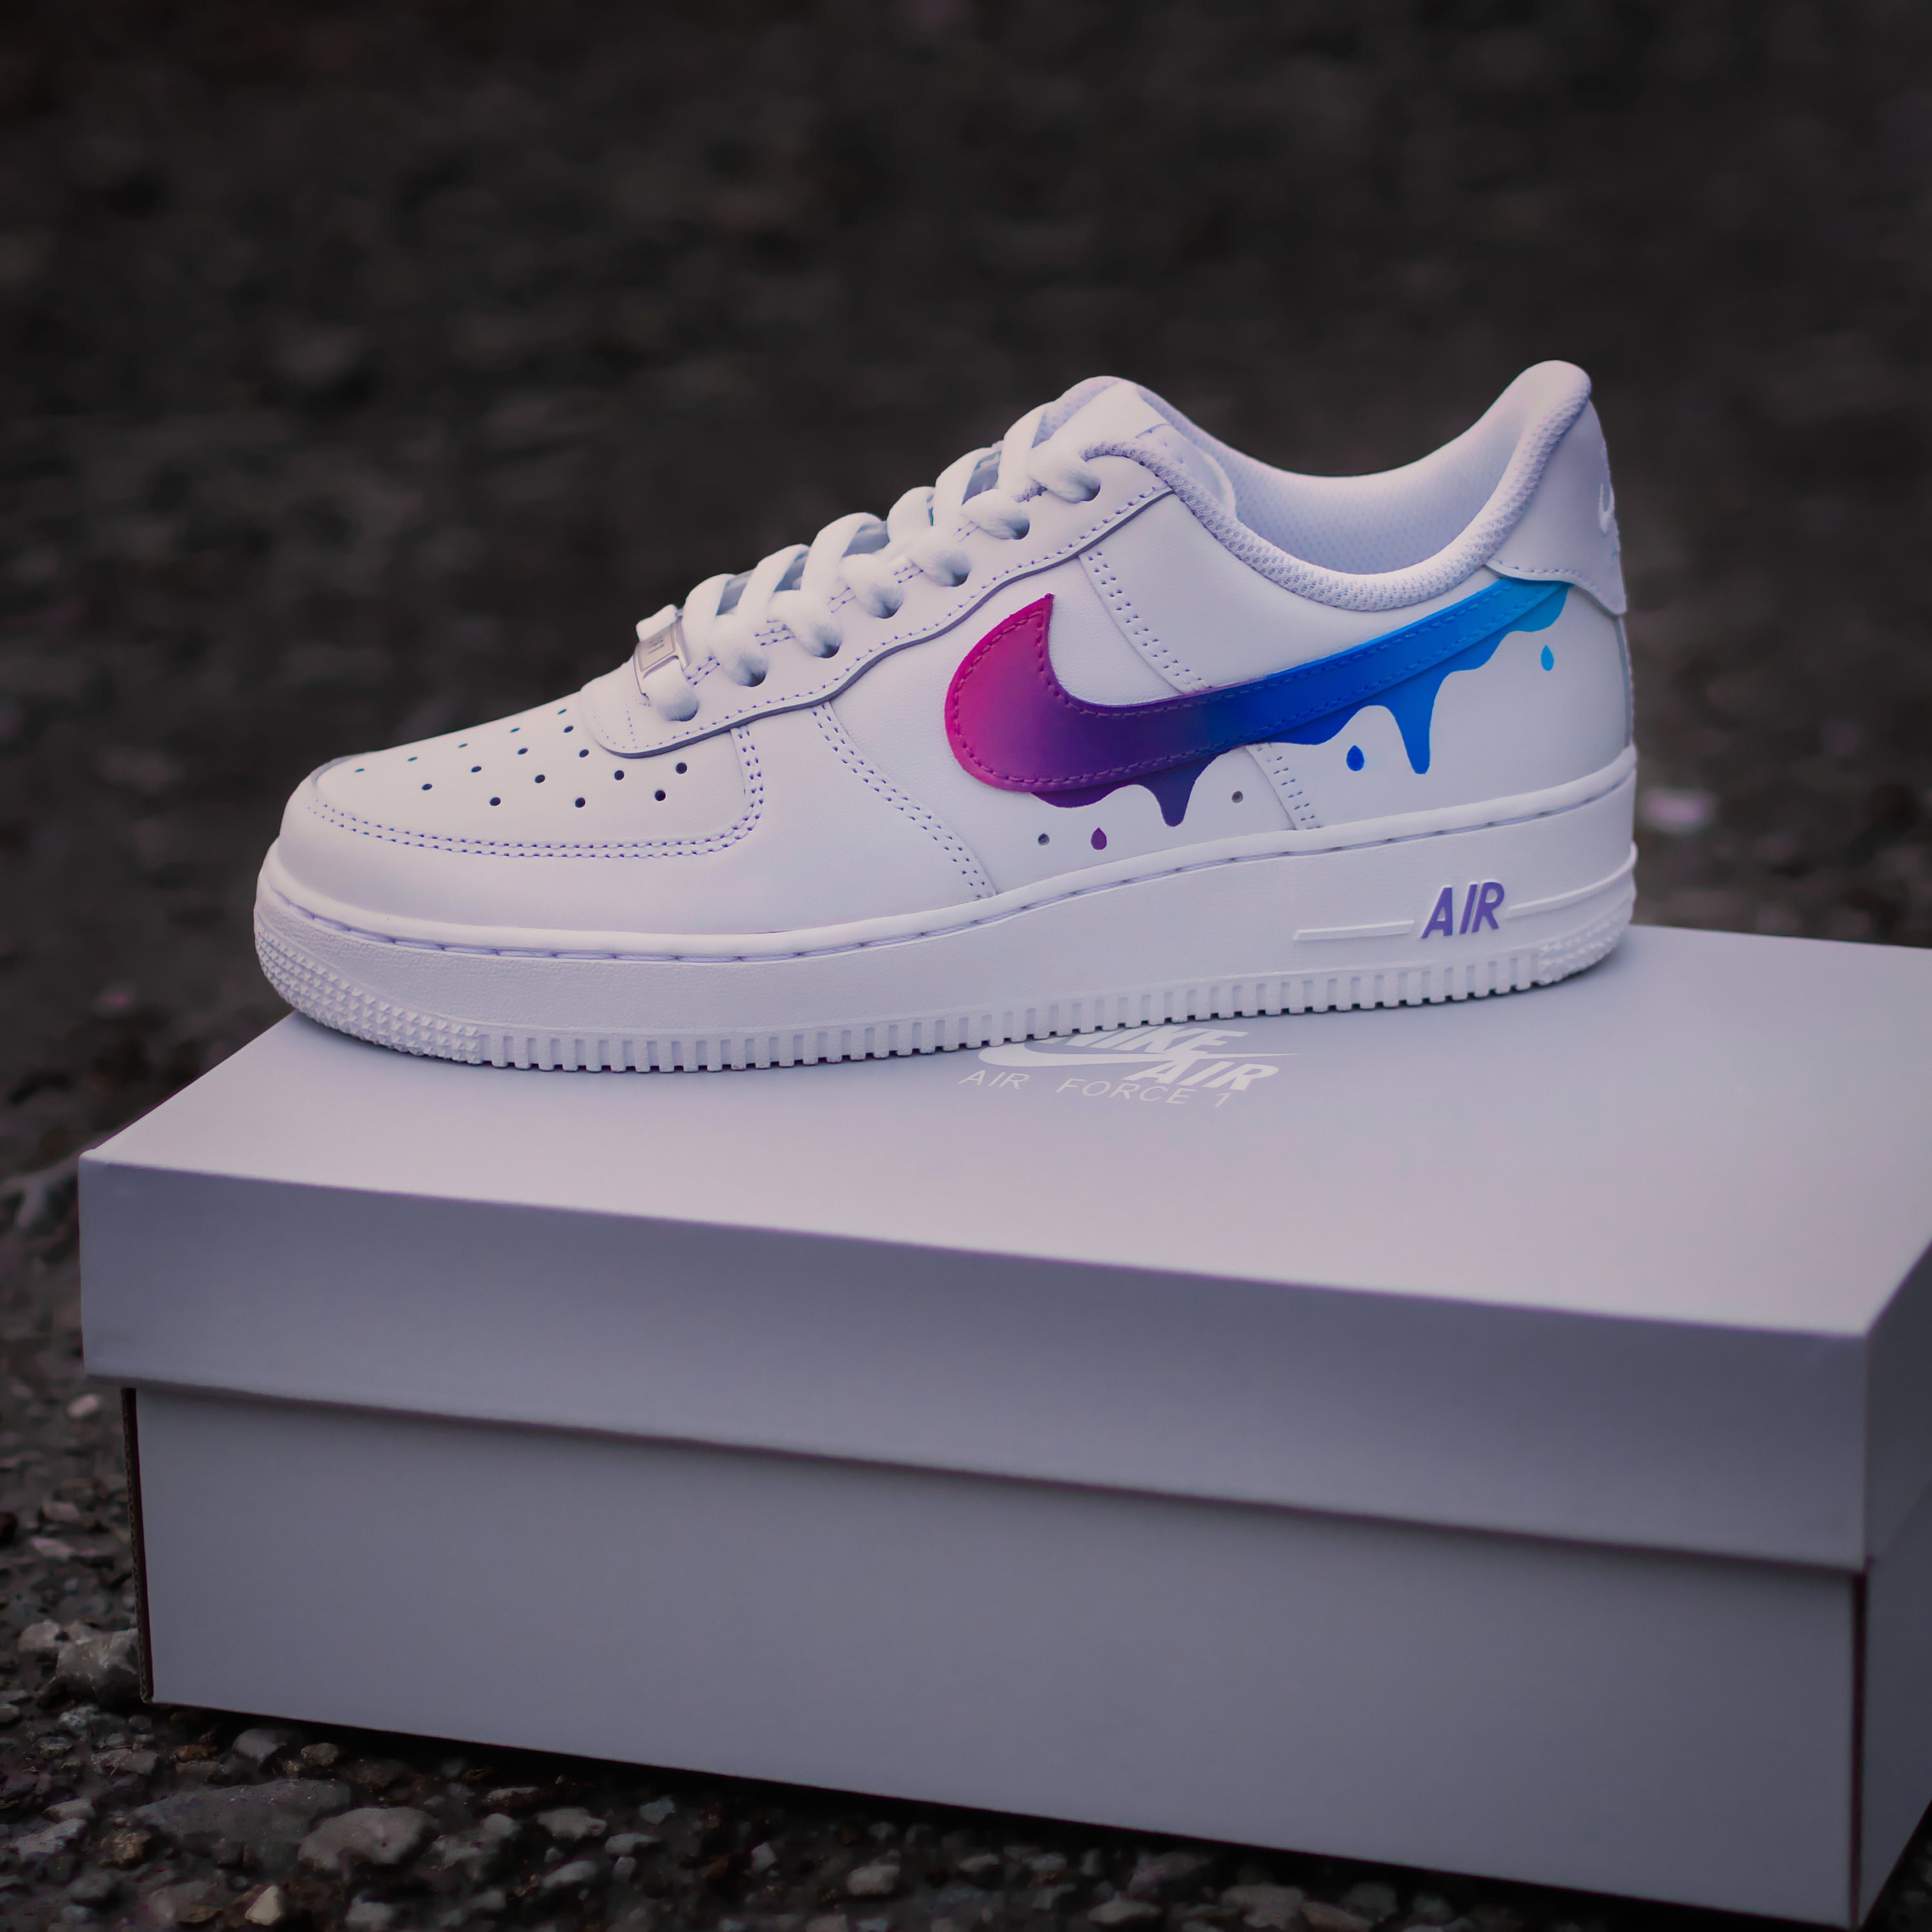 Multi-Color Thermoformed Nike Air Force 1 Drop